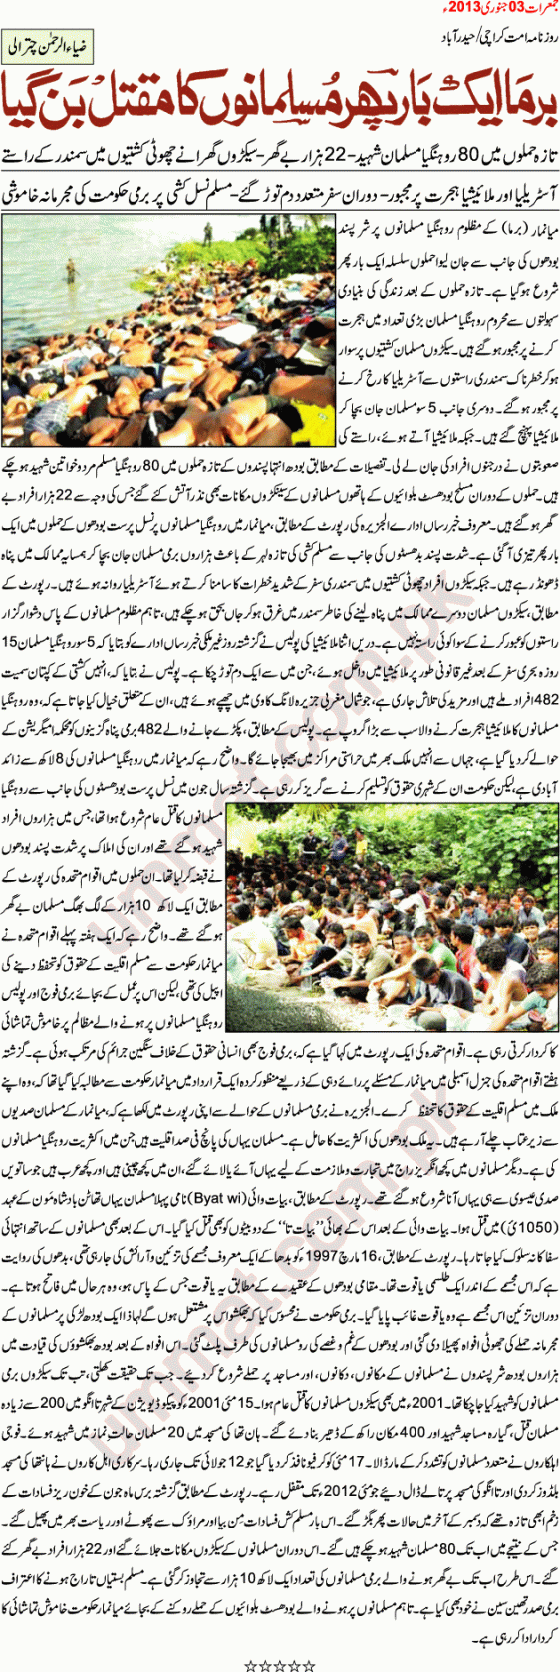 Budhist Terrorism_Genocide of the Burmese Muslims starts once again in Burma